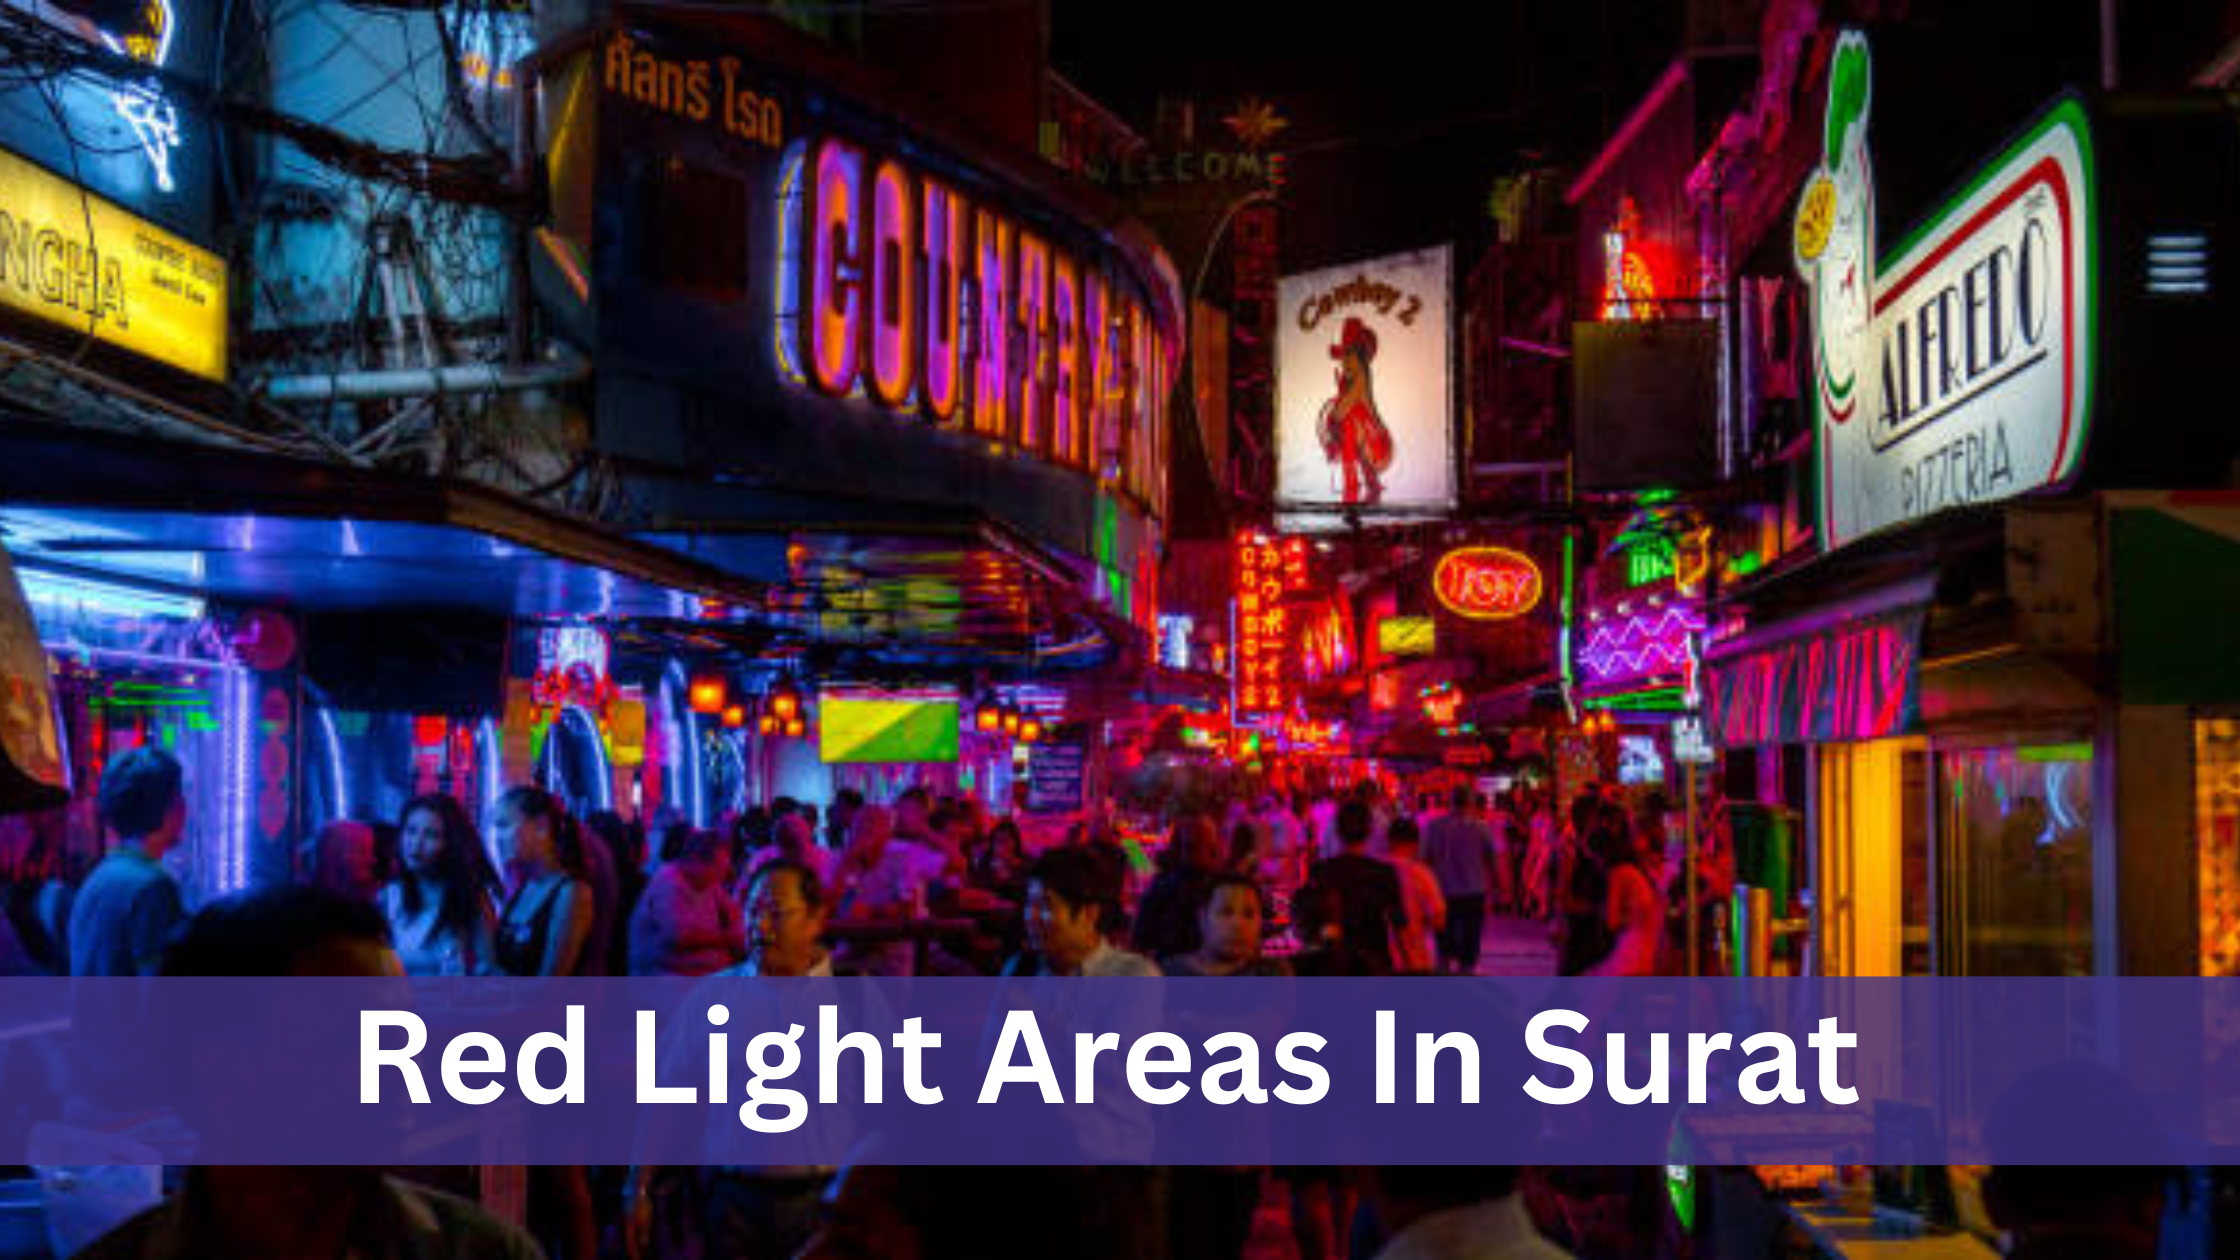 Red Light Areas In Surat